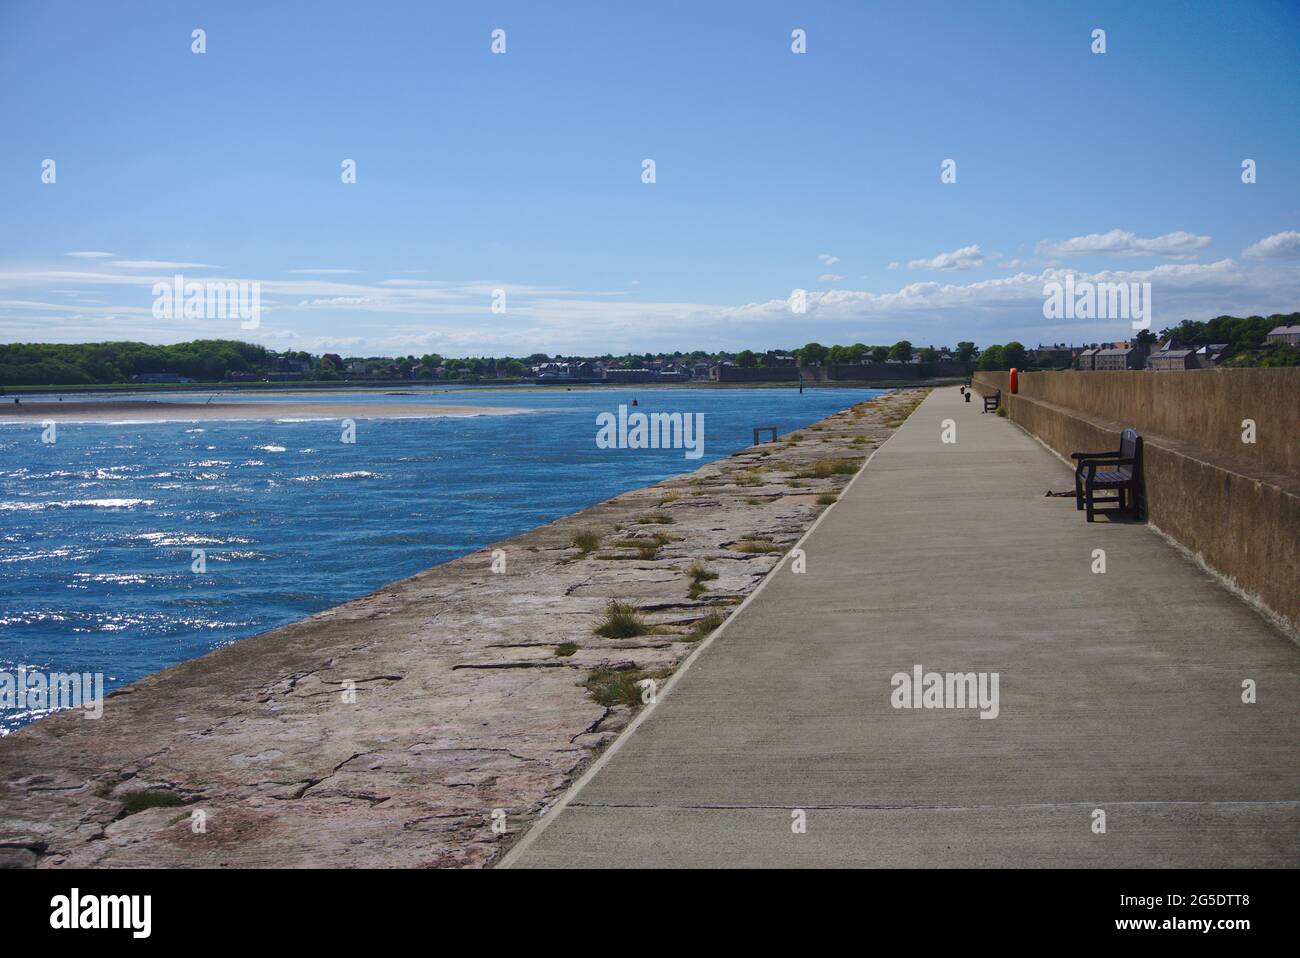 View from Berwick pier with River Tweed on the left and Berwick-upon-Tweed in the background, Northumberland, north east England, UK. Stock Photo